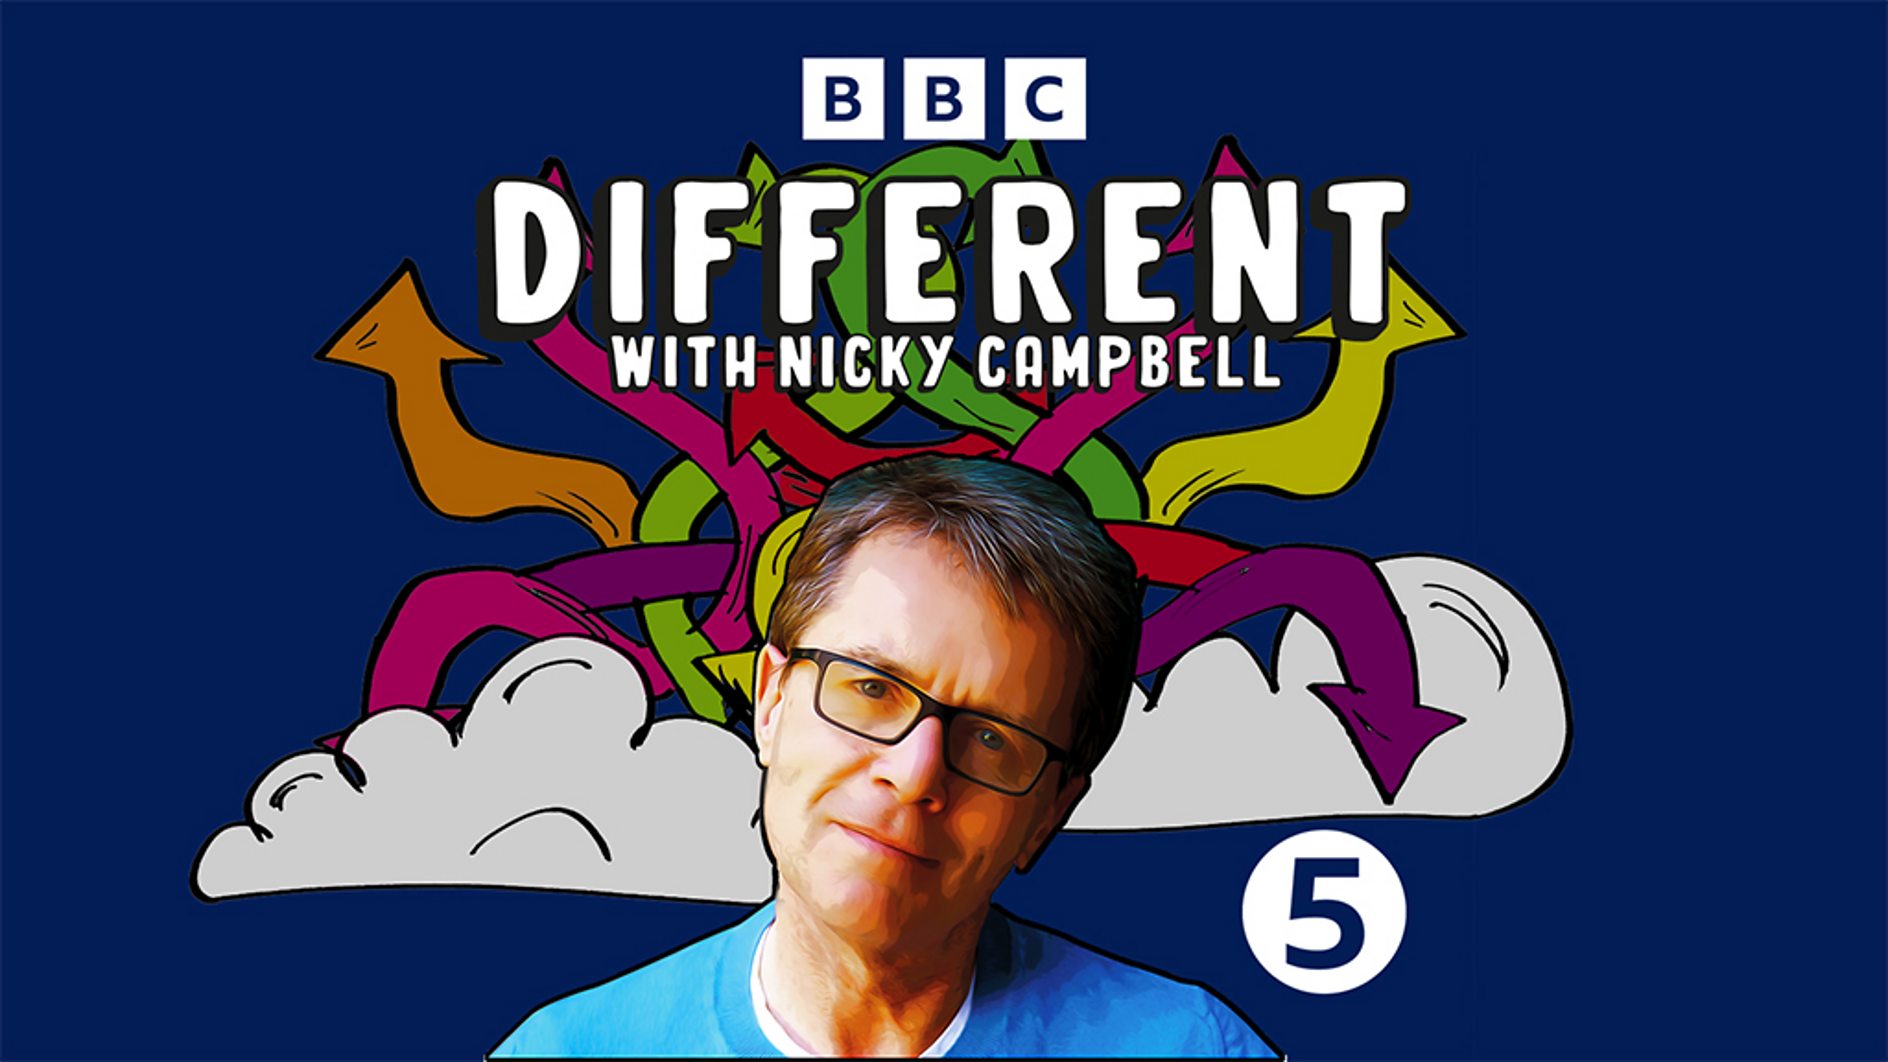 Nicky Campbell’s award-winning BBC podcast Different returns with series three